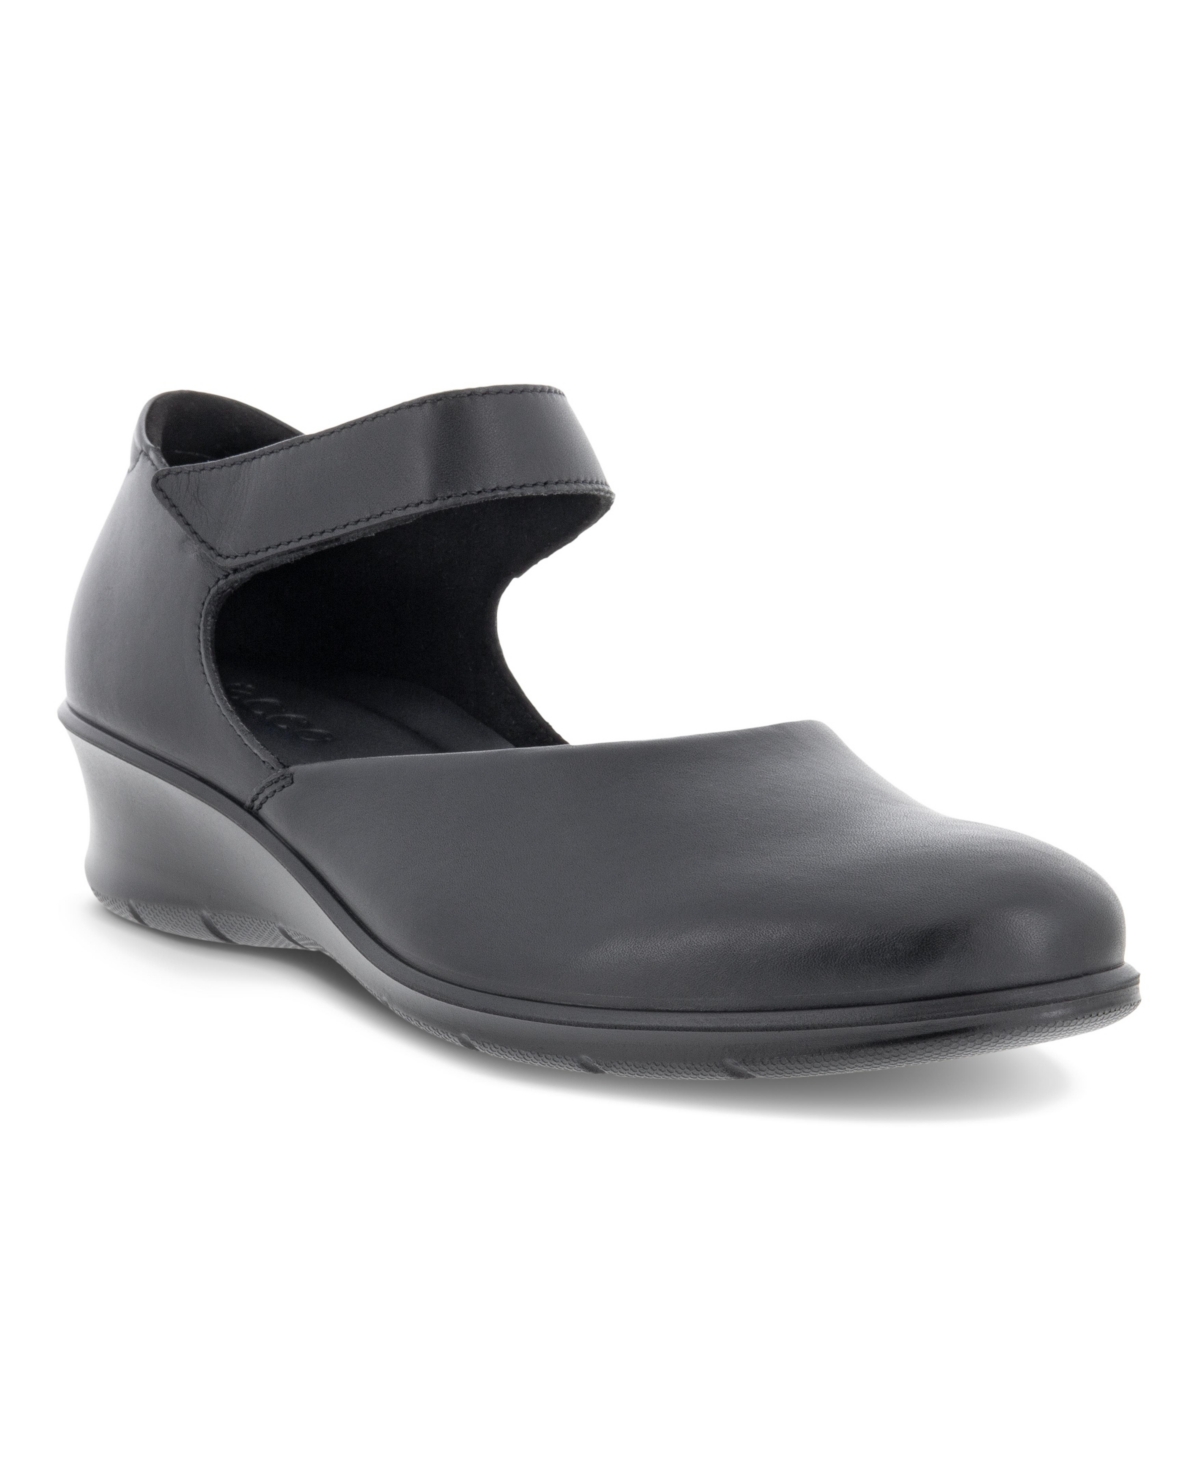 UPC 194891095662 product image for Ecco Women's Felicia Mary Jane Flats Women's Shoes | upcitemdb.com